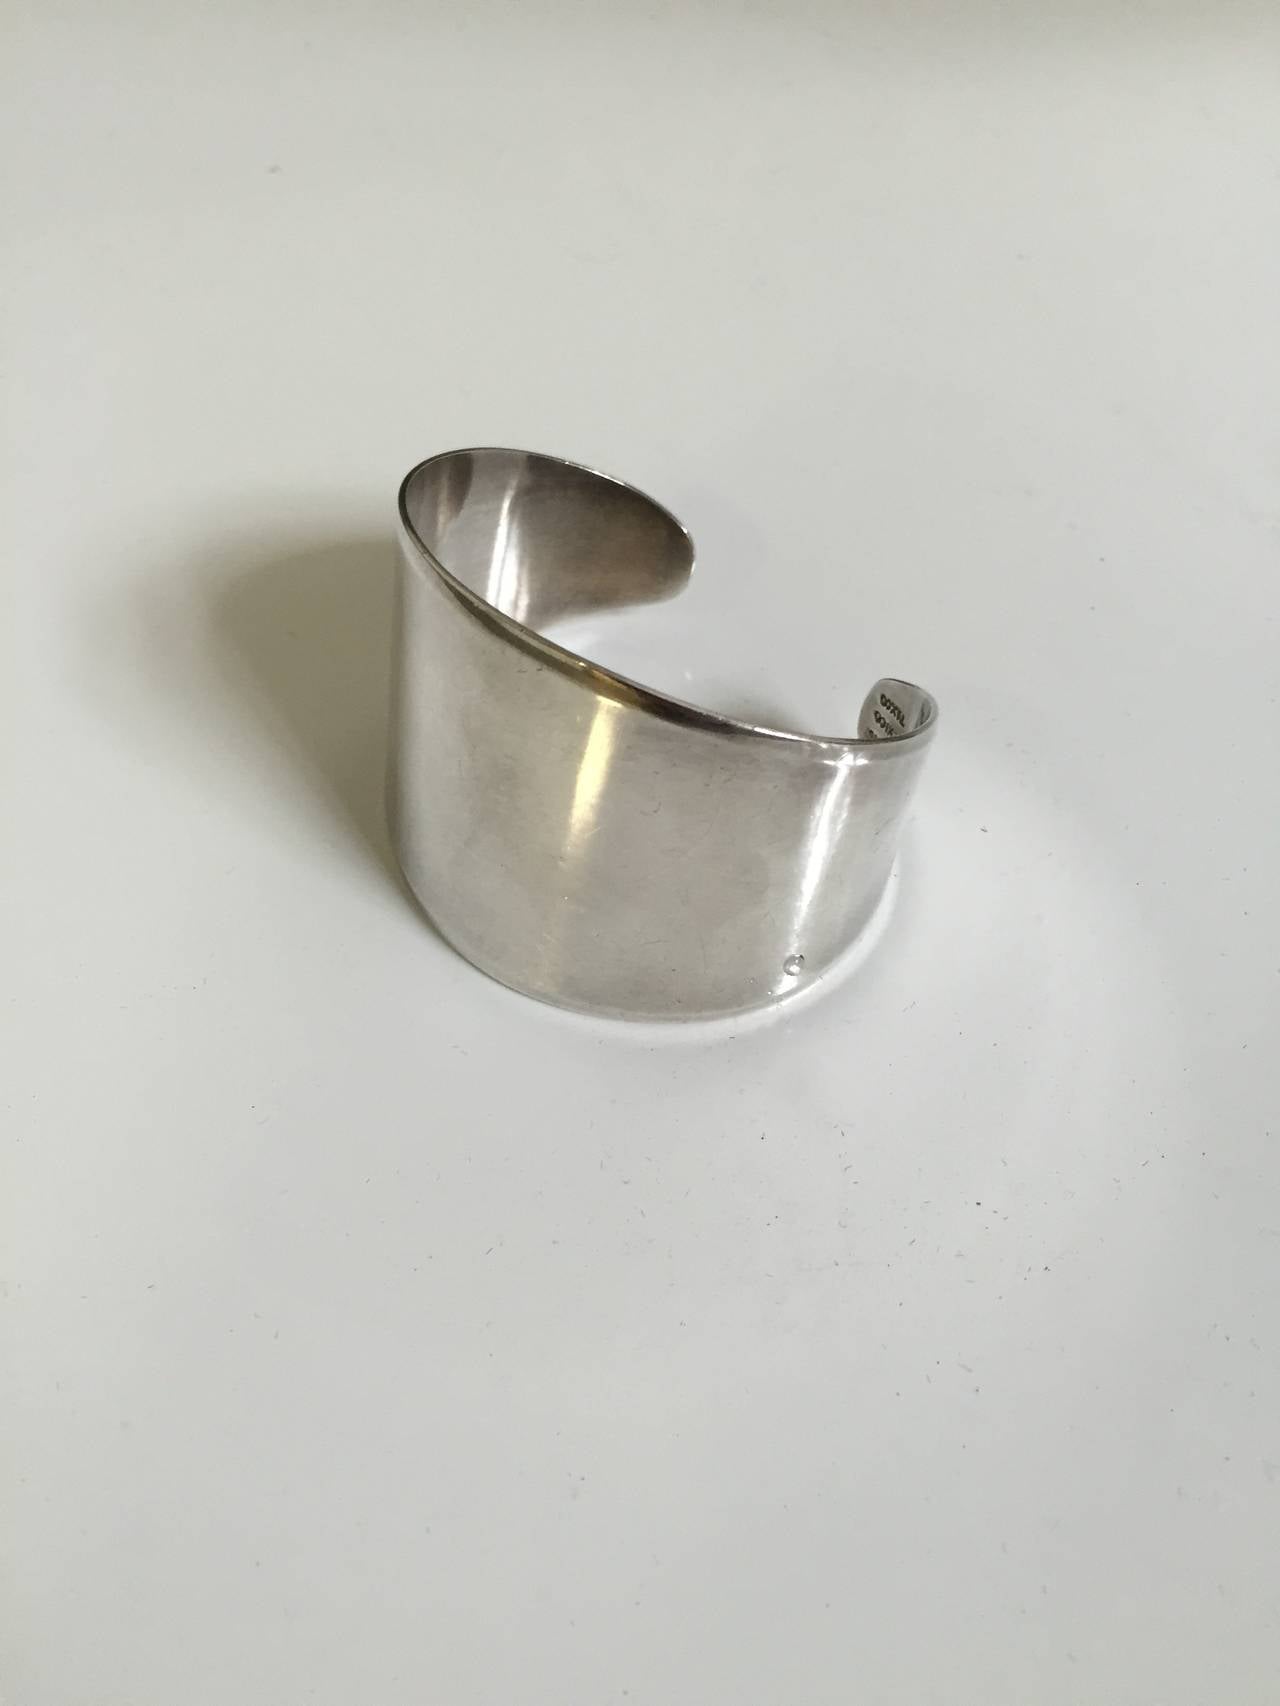 Modernist Taxco Mexico silver modernist cuff bracelet. For Sale